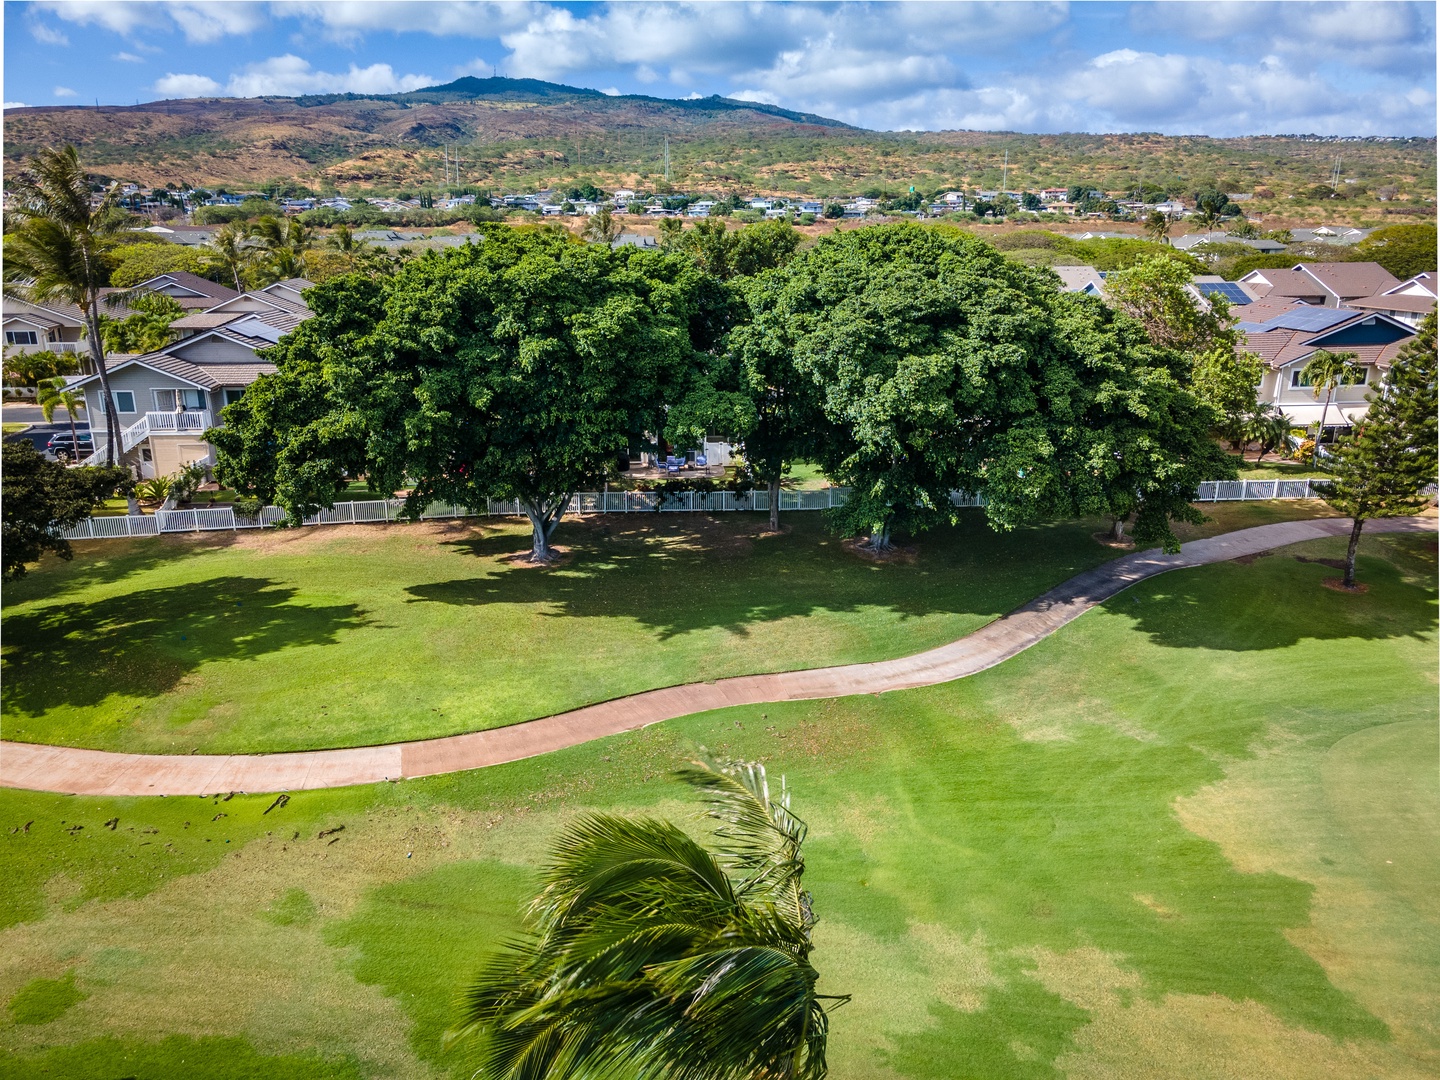 Kapolei Vacation Rentals, Fairways at Ko Olina 4A - Another image of a lovely island day for golfing, swimming and relaxing.